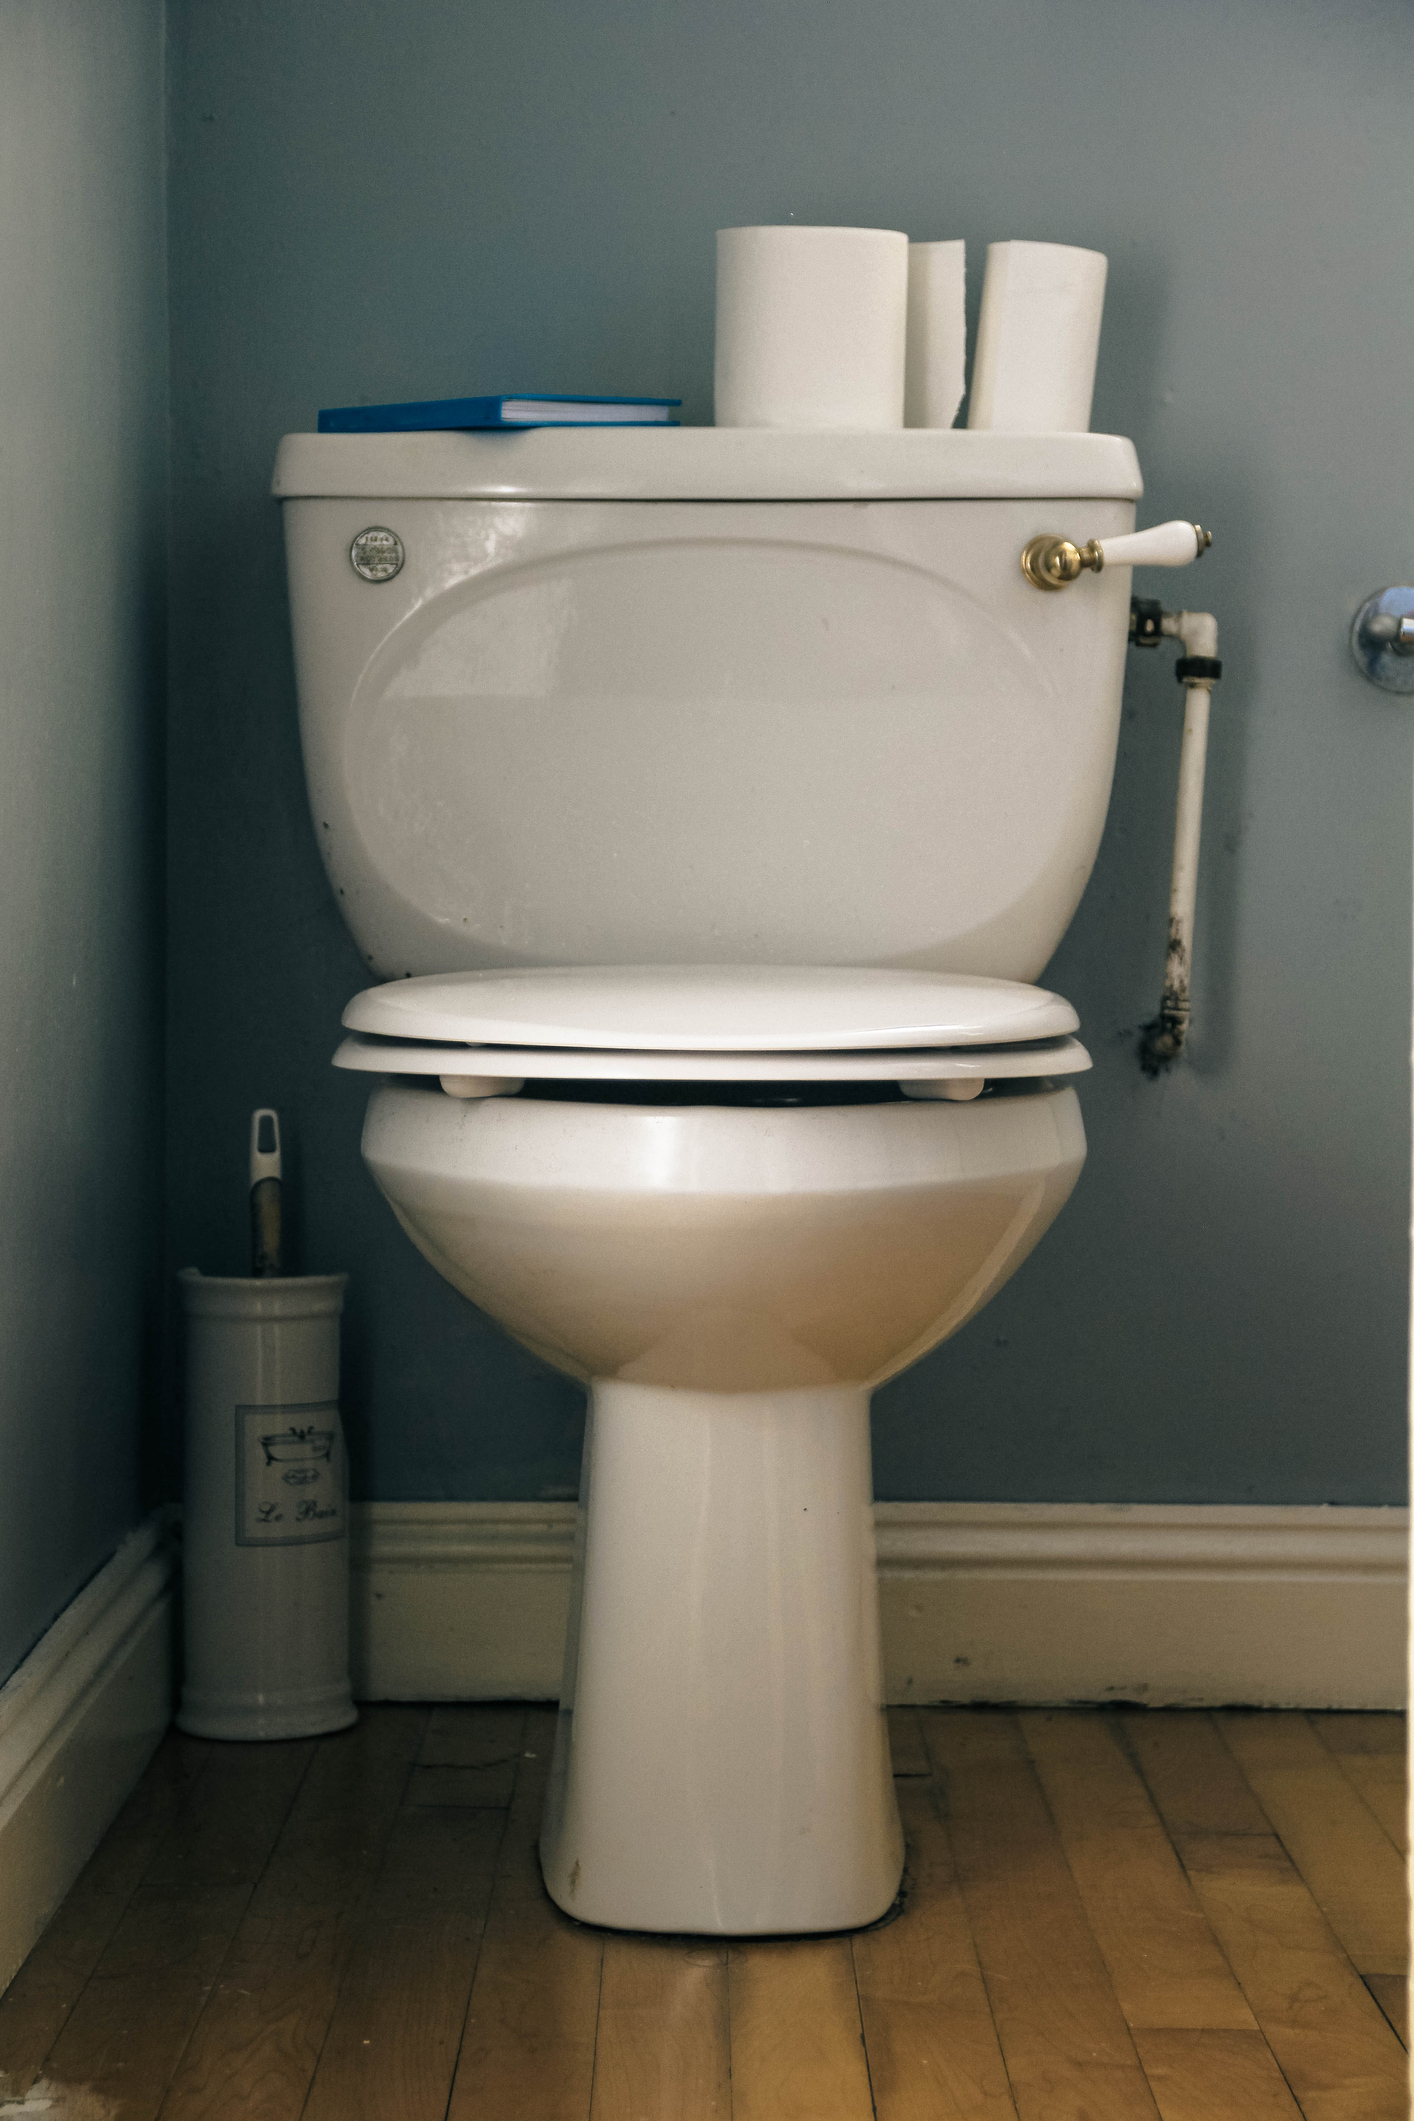 Toilet with a closed lid and extra rolls of paper on the tank, next to a small trash can